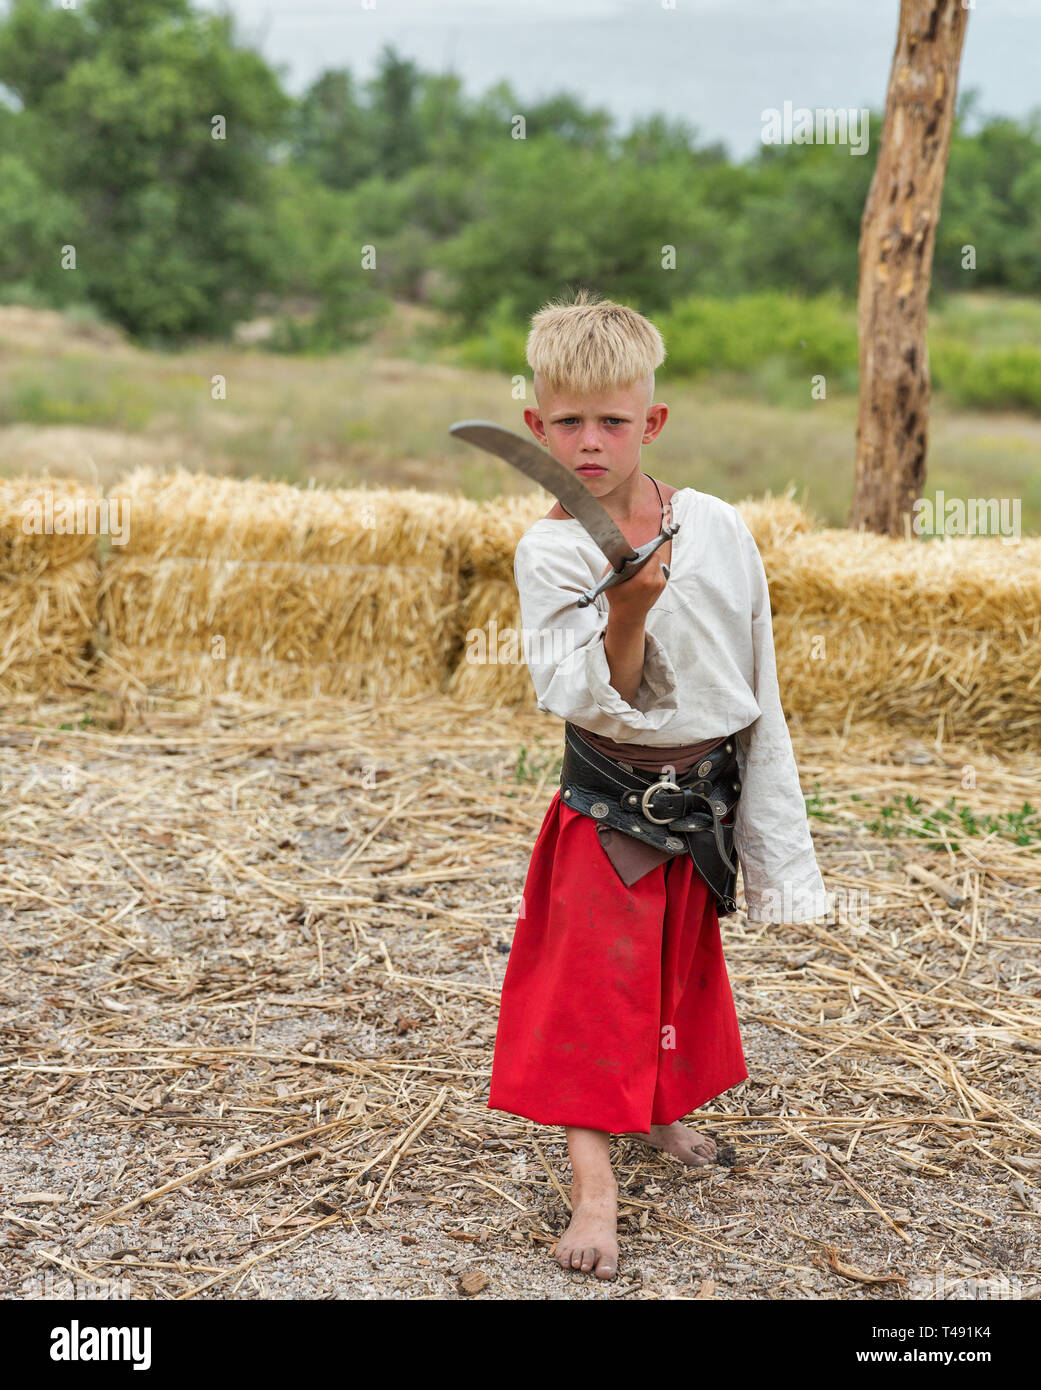 KHORTYTSIA, UKRAINE - JULY 03, 2018: Young boy Ukrainian Cossack with saber in Zaporozhian Sich. It was inhabited by Cossacks who lived beyond the rap Stock Photo